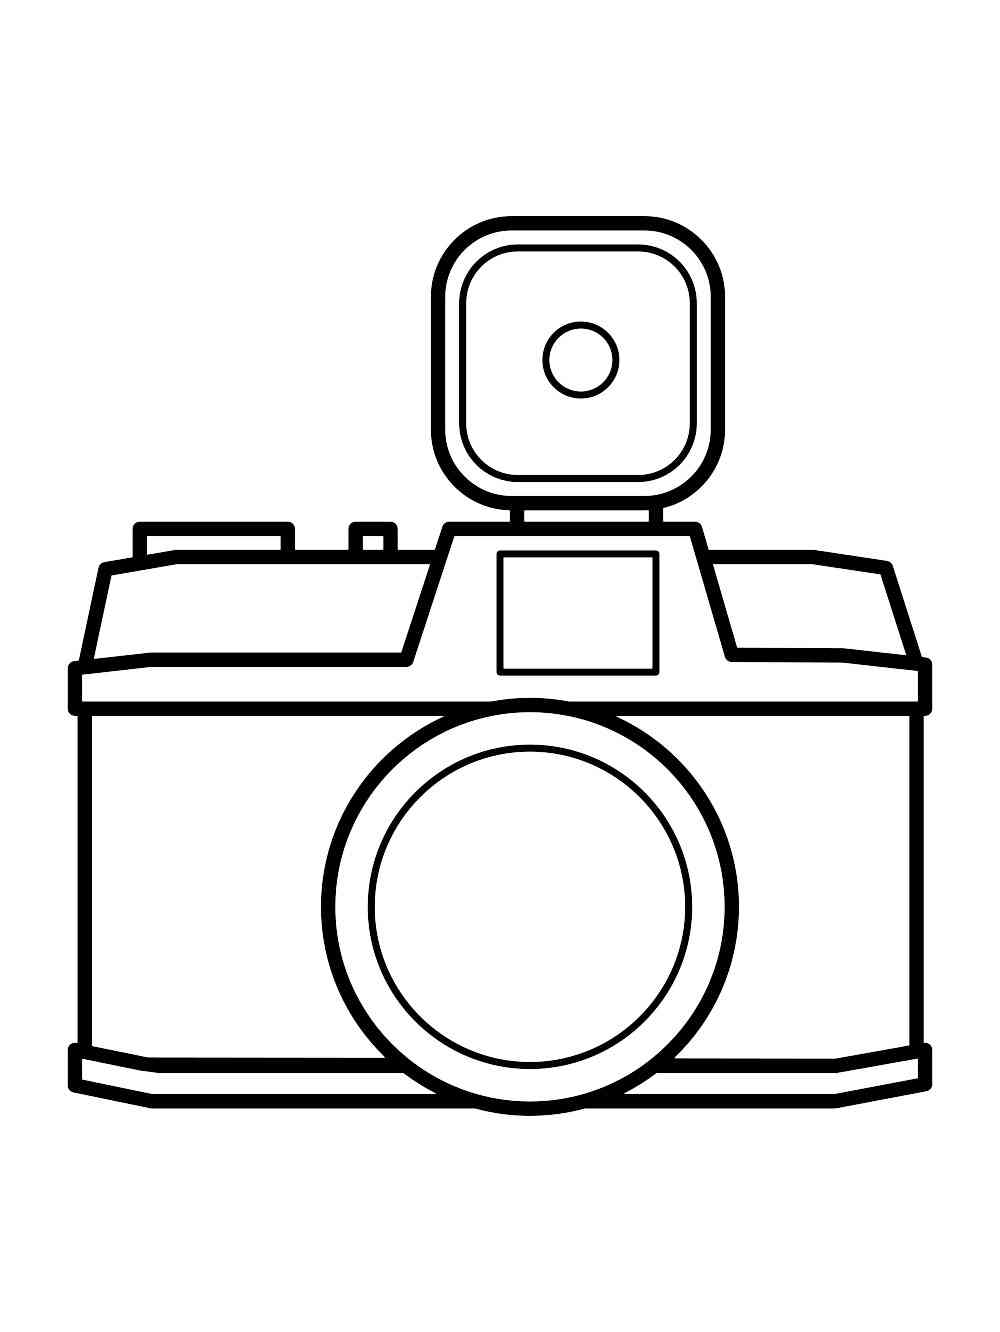 Free Camera coloring pages. Download and print Camera coloring pages